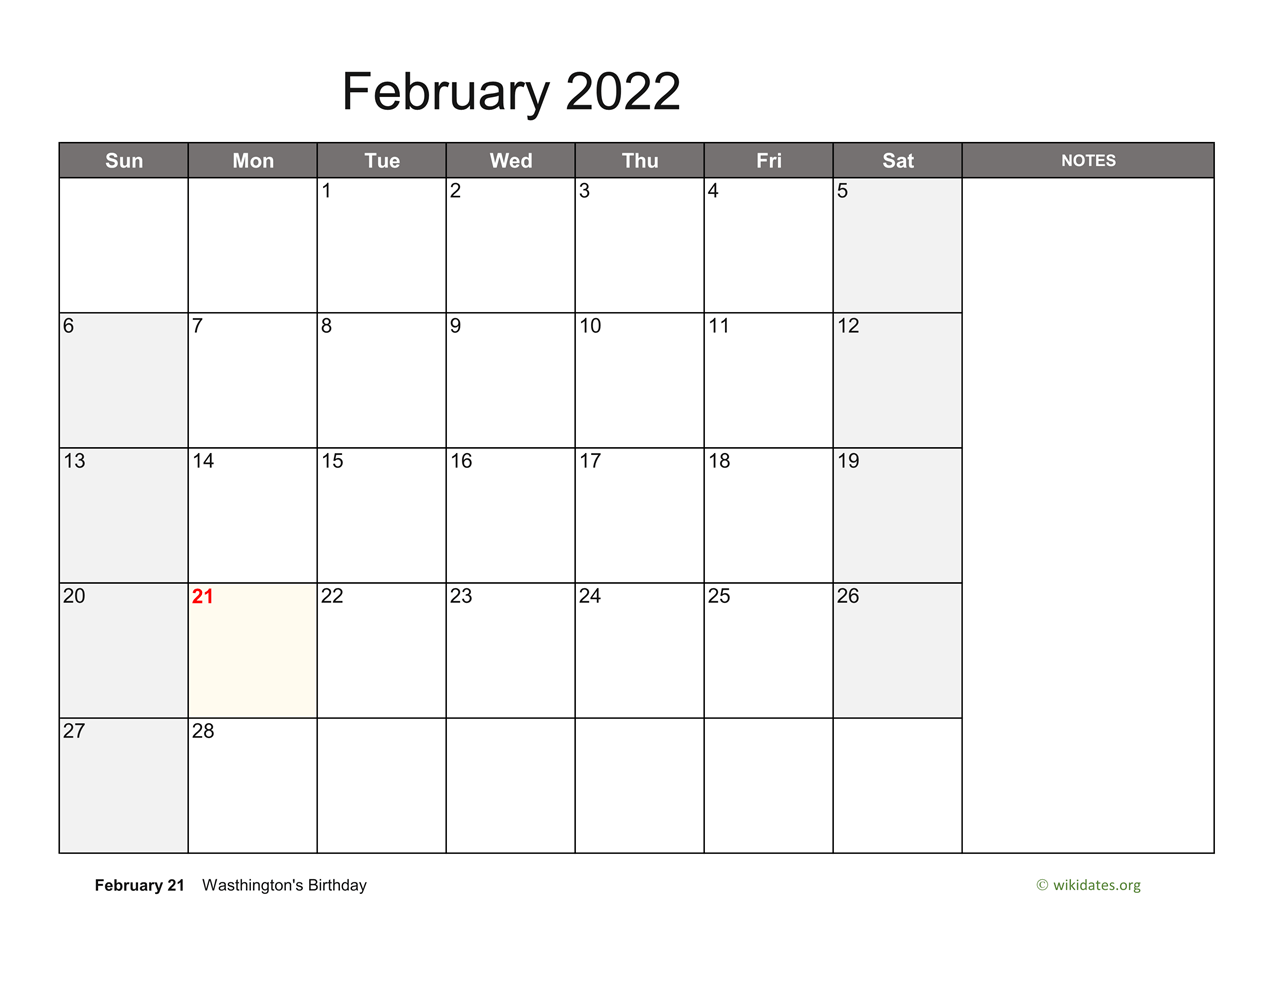 February 2022 Calendar With Notes Wikidates Org